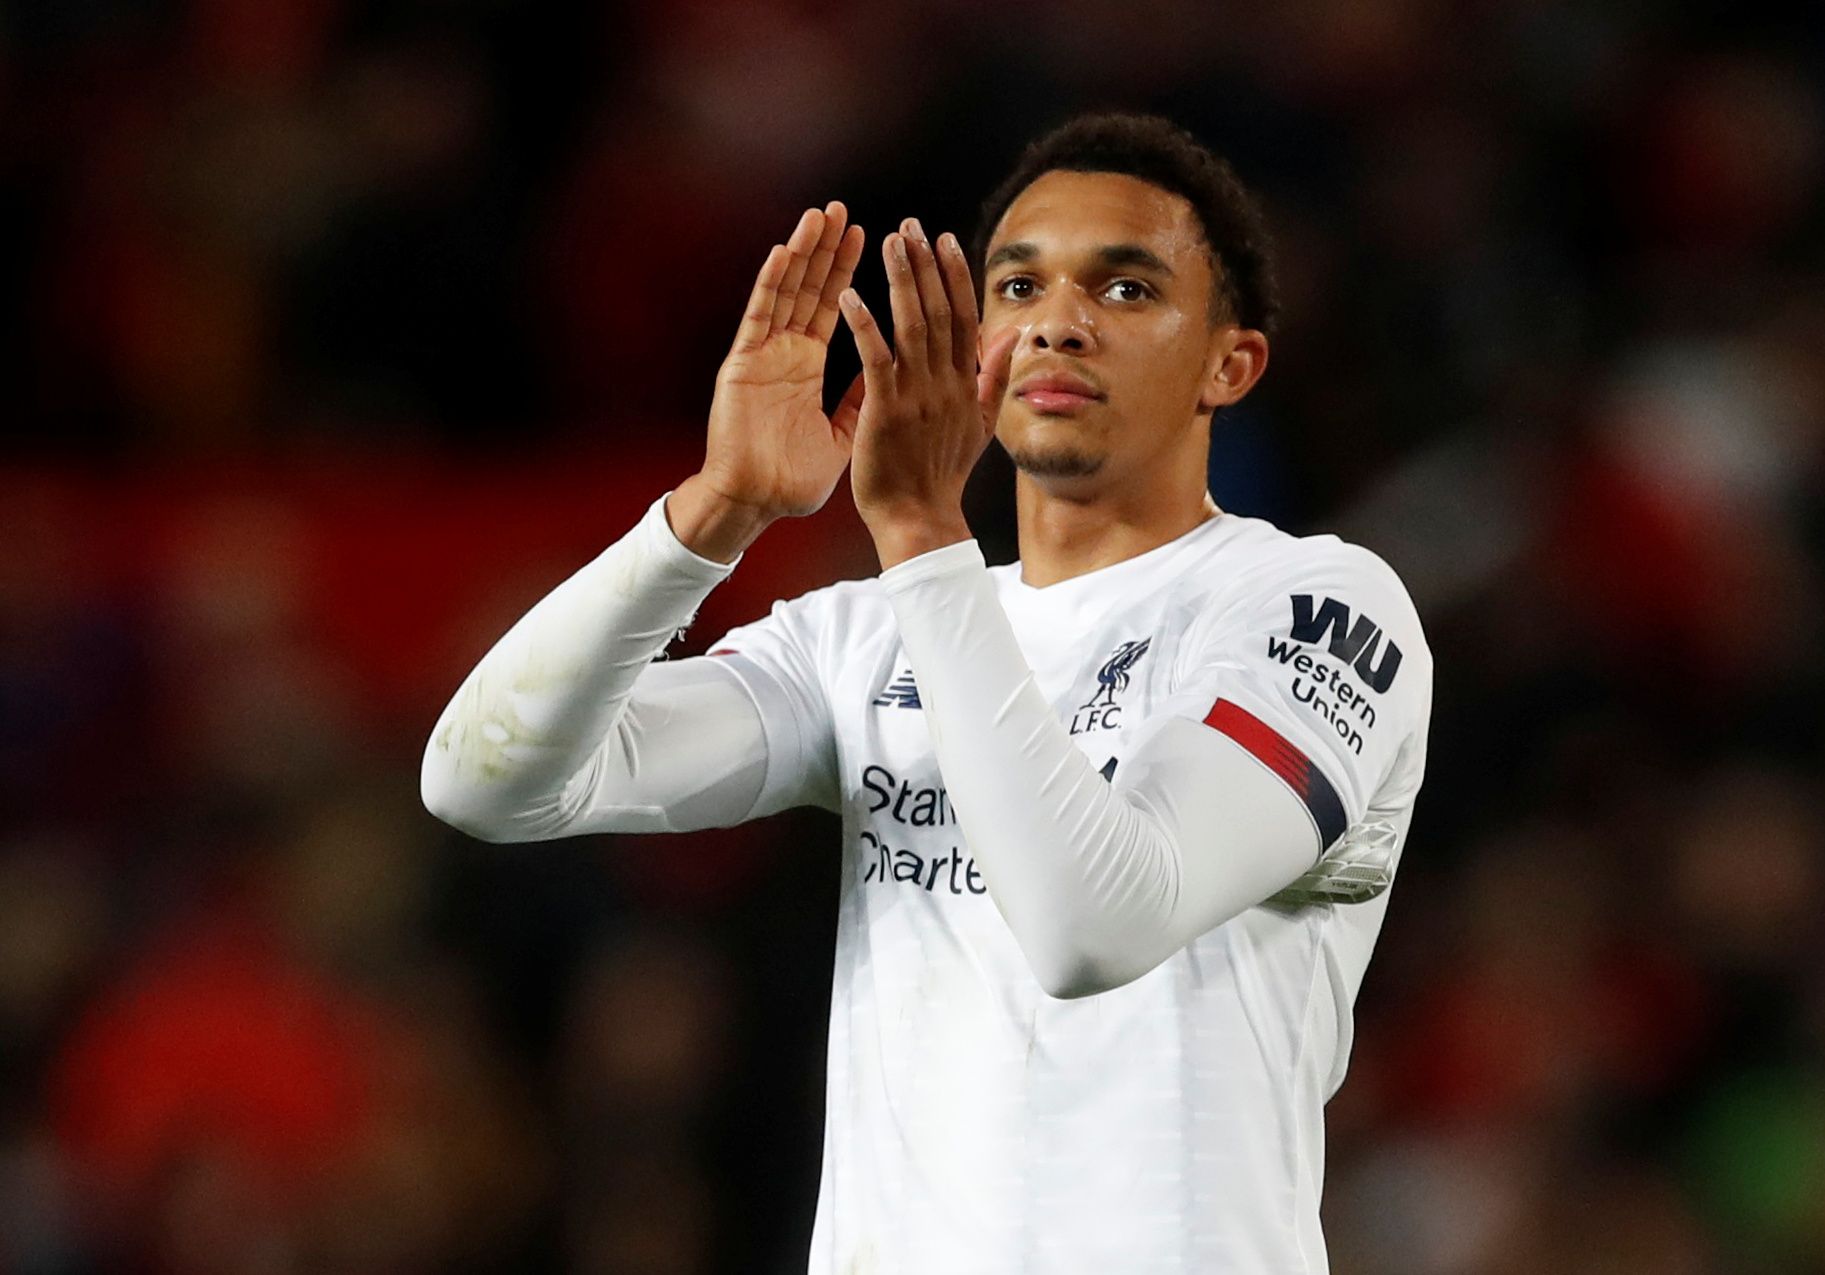 Soccer Football - Premier League - Manchester United v Liverpool - Old Trafford, Manchester, Britain - October 20, 2019  Liverpool's Trent Alexander-Arnold applauds fans after the match        REUTERS/Russell Cheyne  EDITORIAL USE ONLY. No use with unauthorized audio, video, data, fixture lists, club/league logos or 